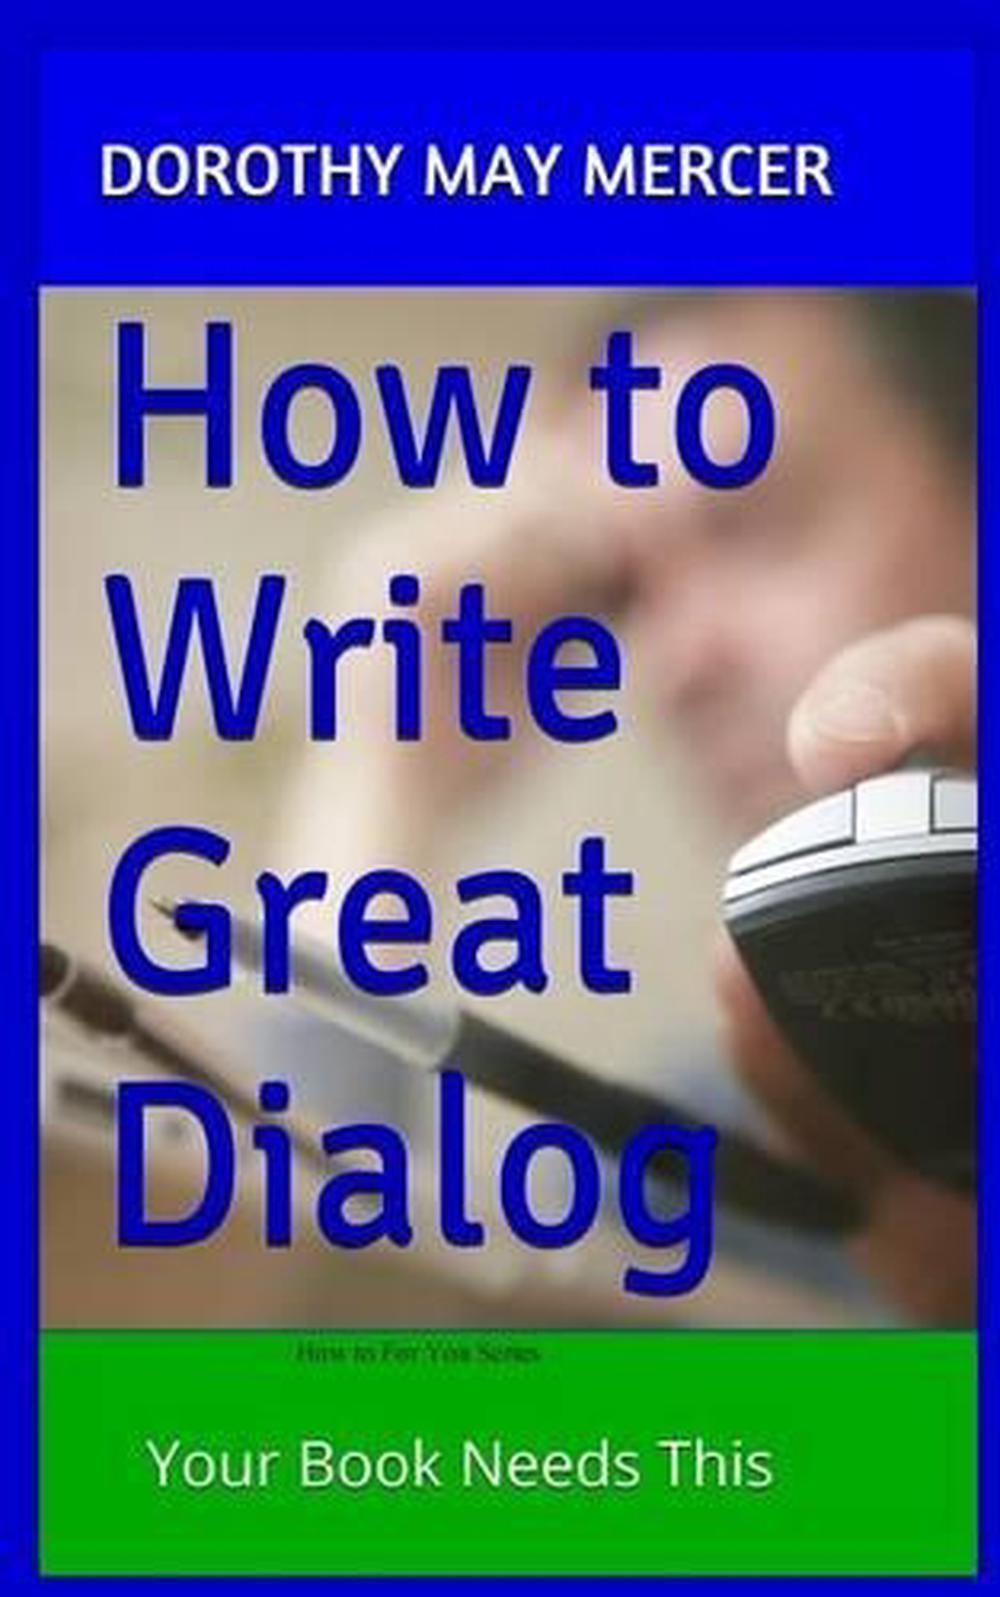 How to Write Great Dialog by Dorothy May Mercer